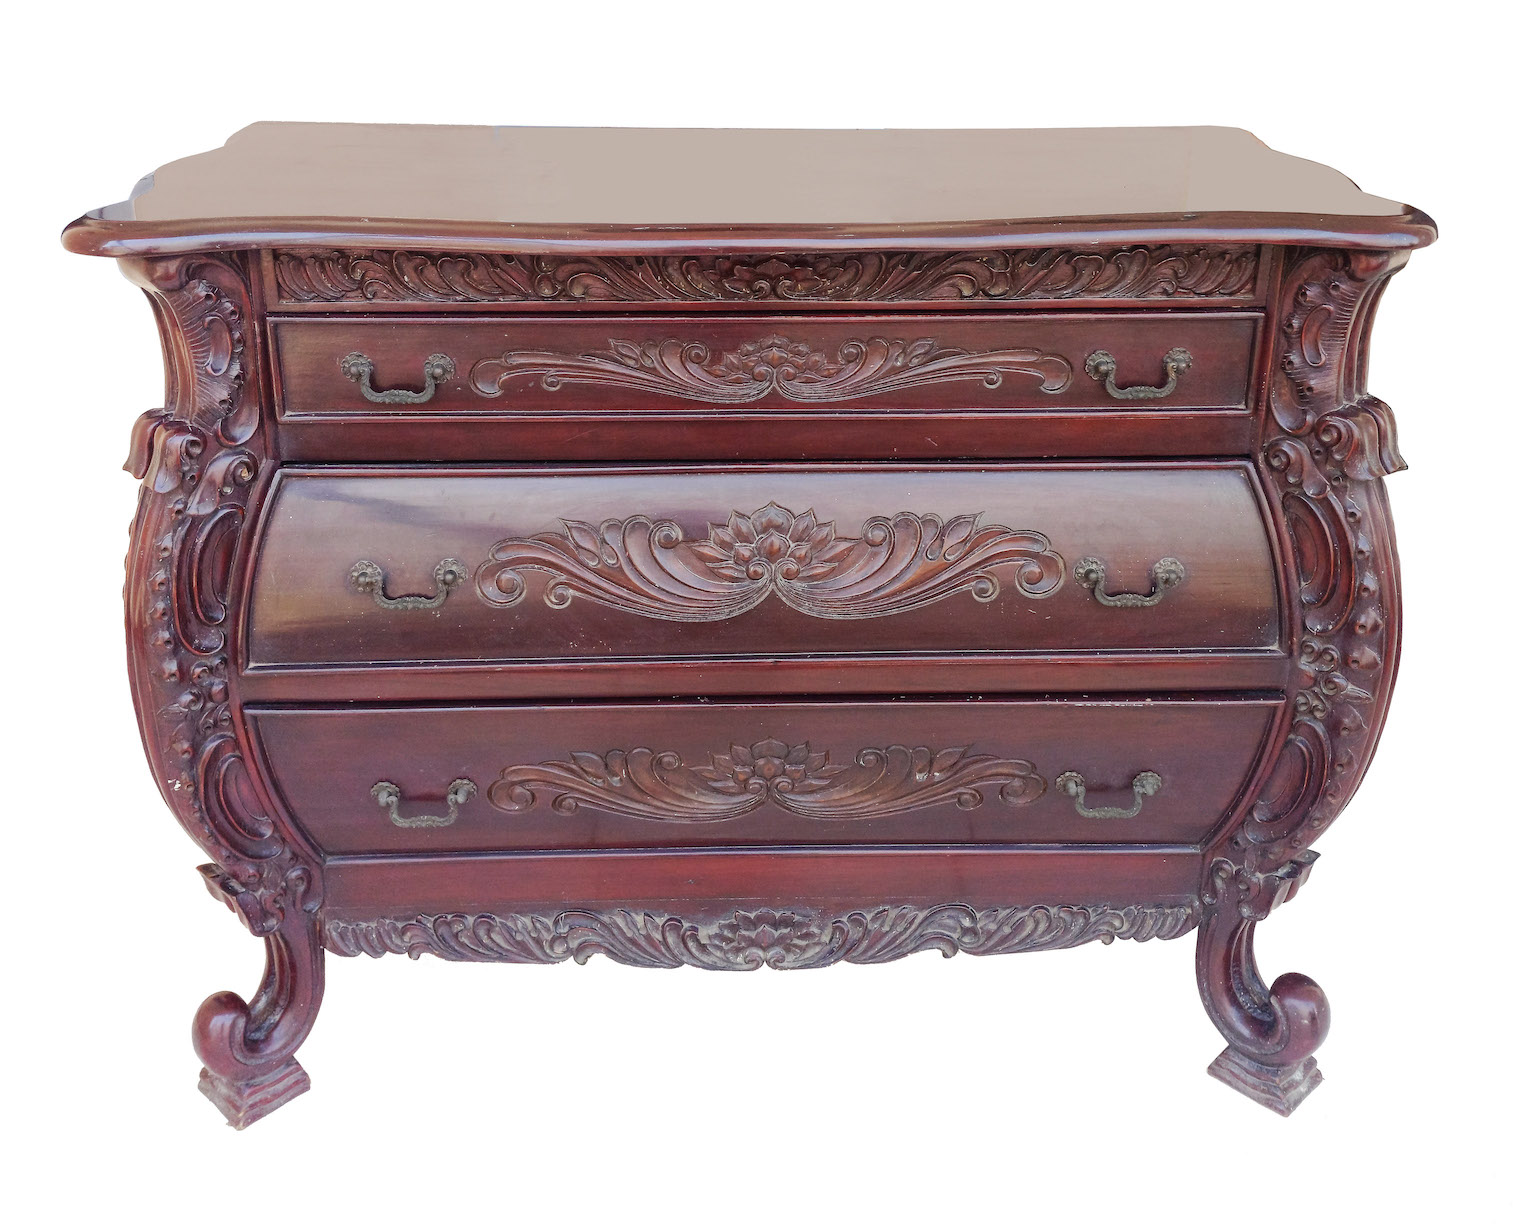 A carved teak commode with three drawers and brass handle